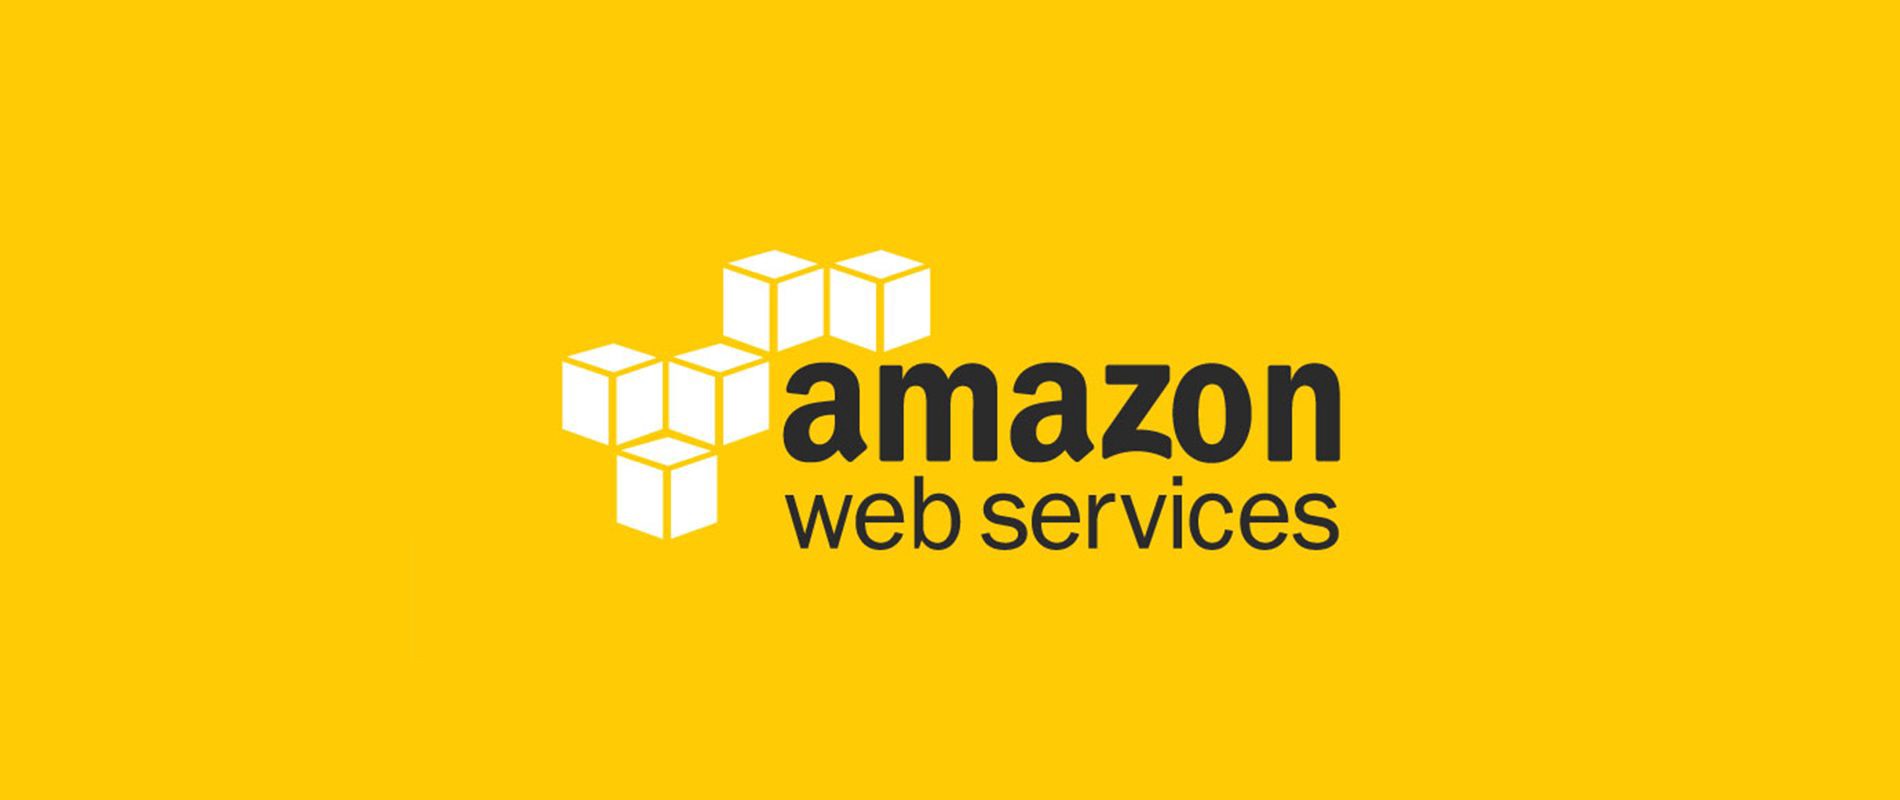 AWS Certified Security – Specialty